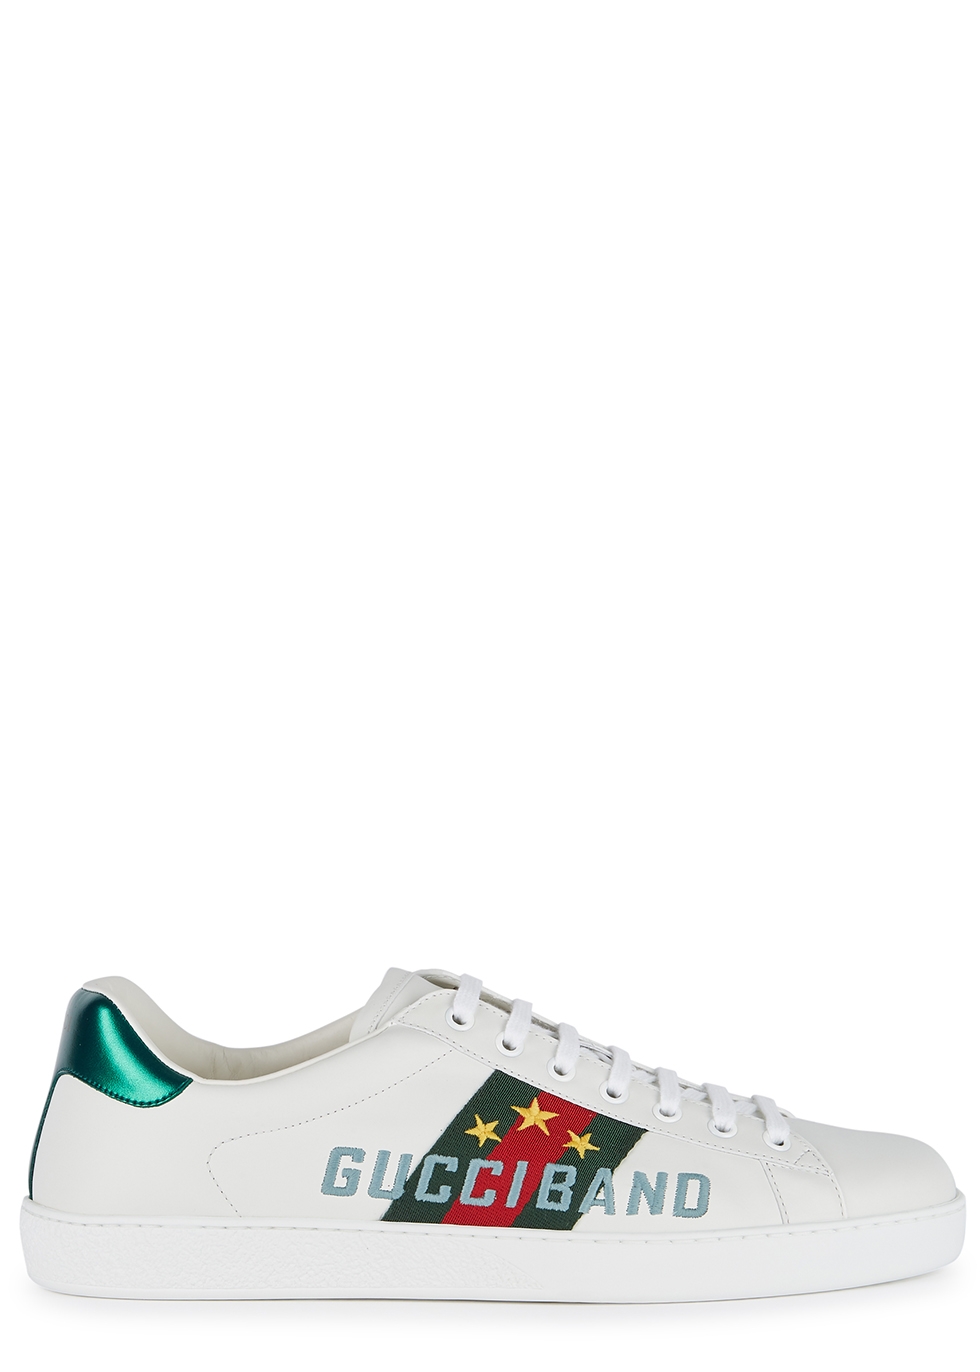 gucci off white shoes